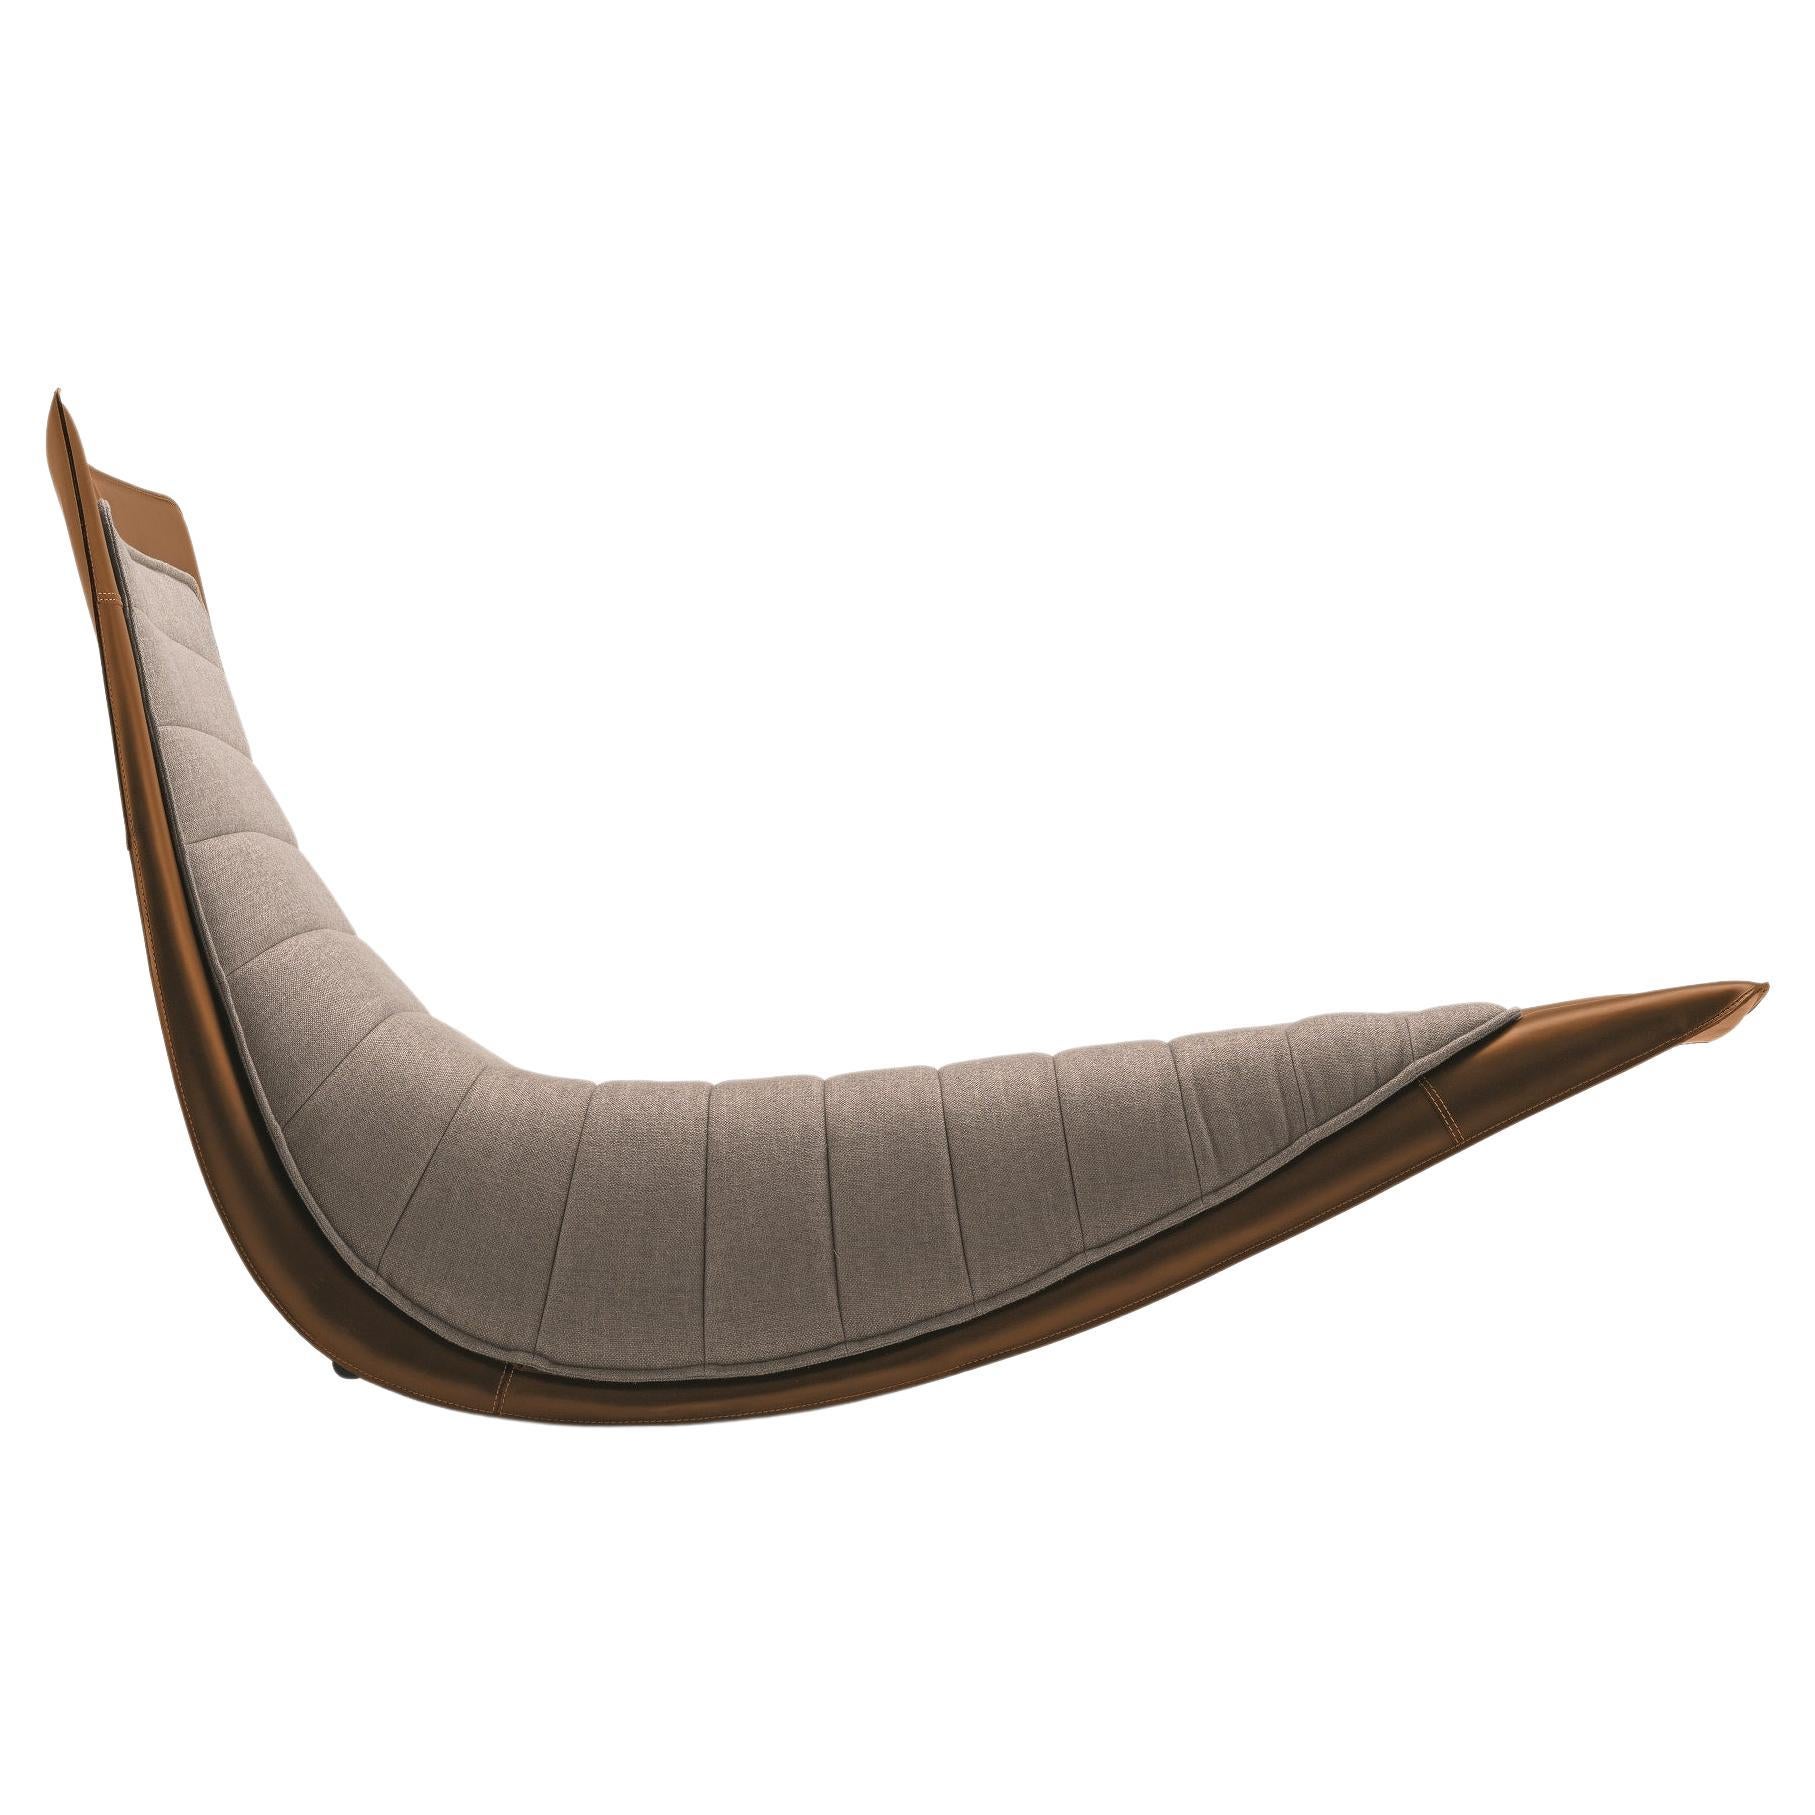 Zanotta Rider Tilting Chaise Longue in Brown Fabric by Ludovica+Roberto Palomba